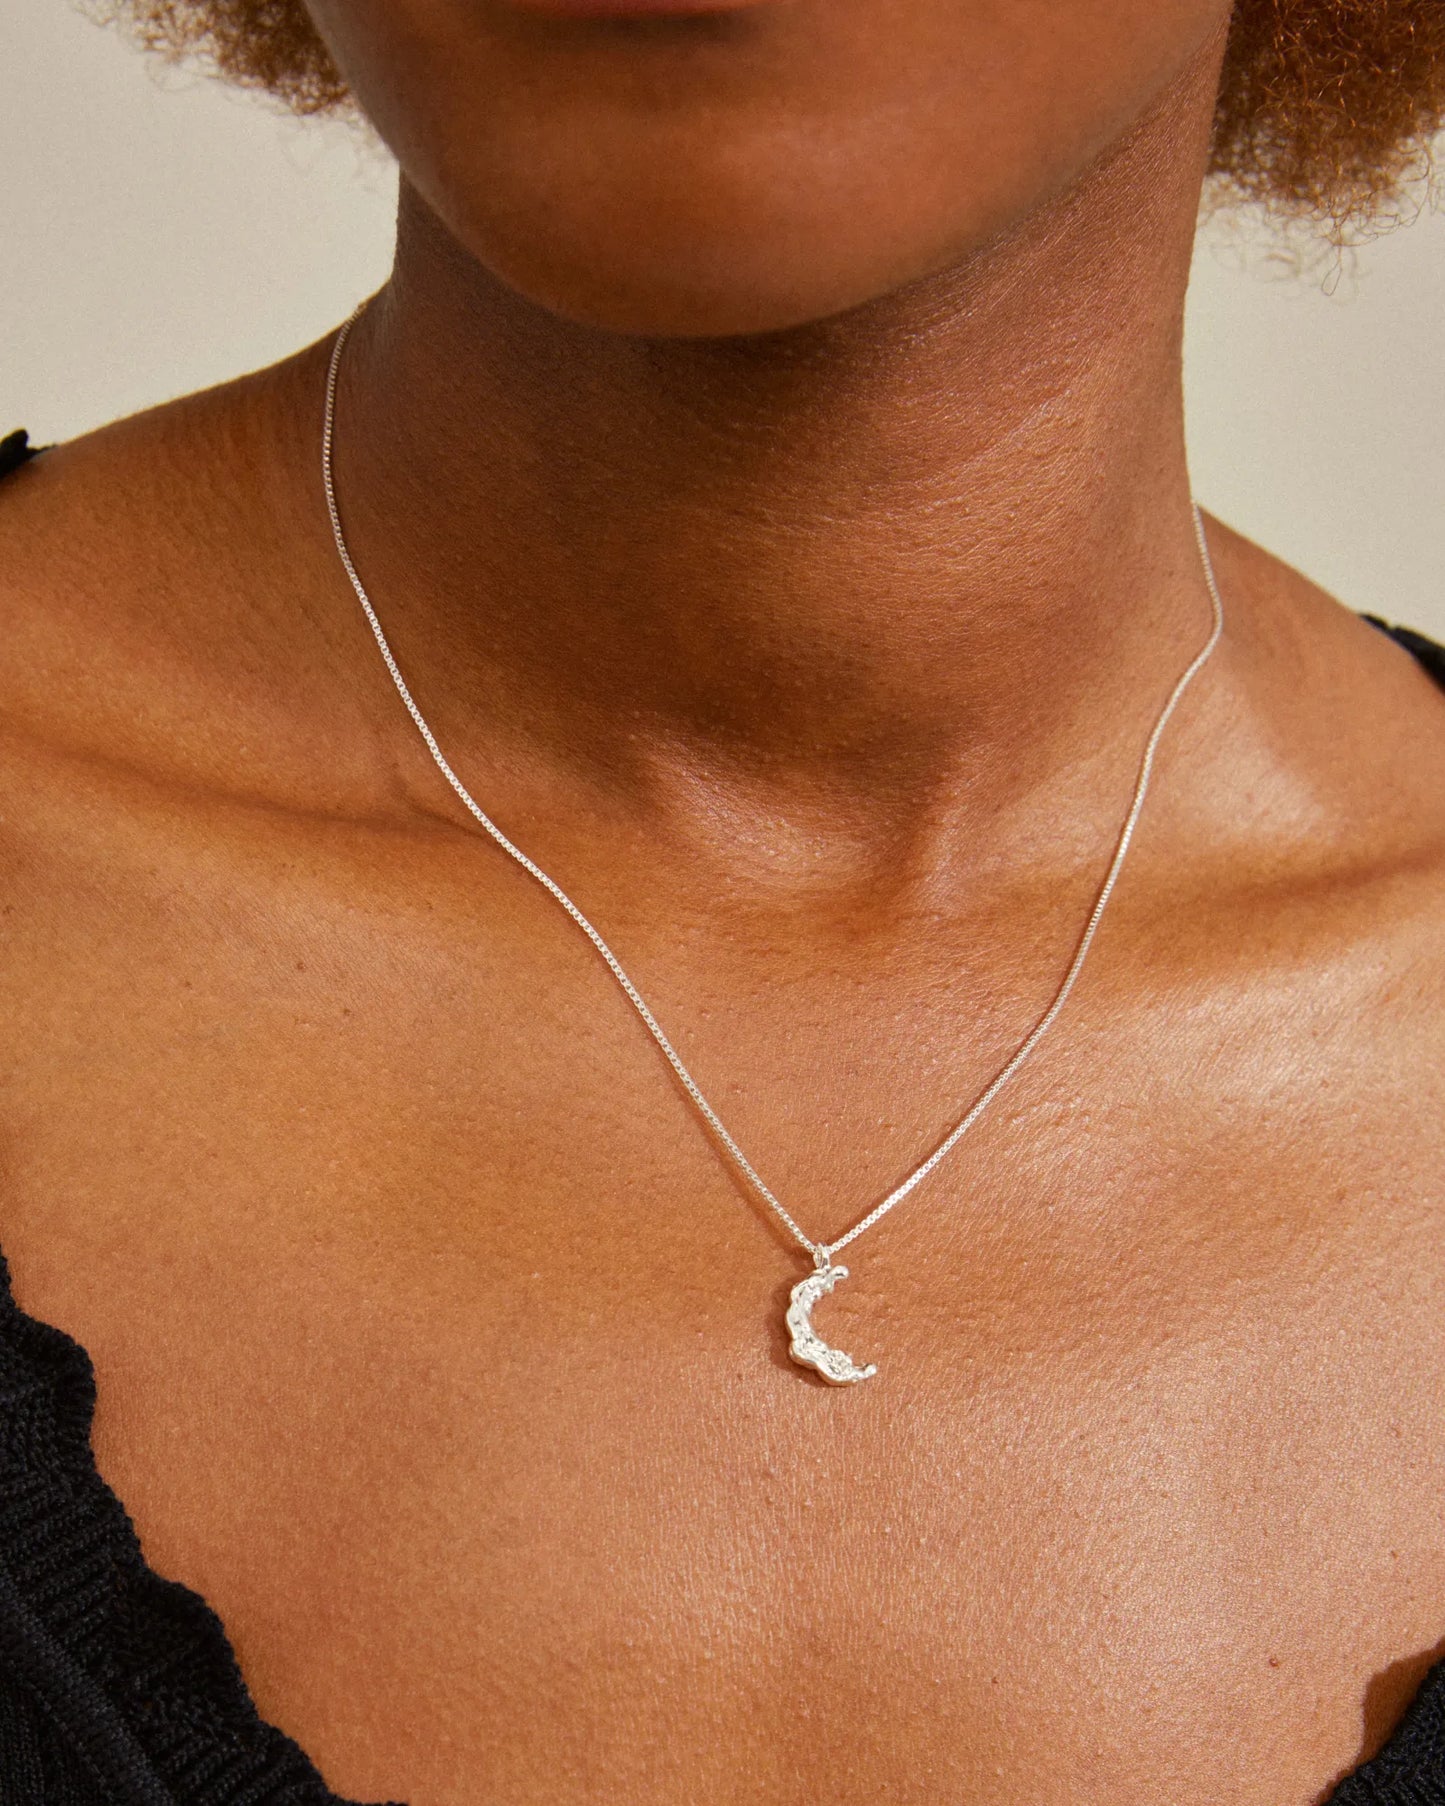 REMY Recycled Necklace - Silver Plated